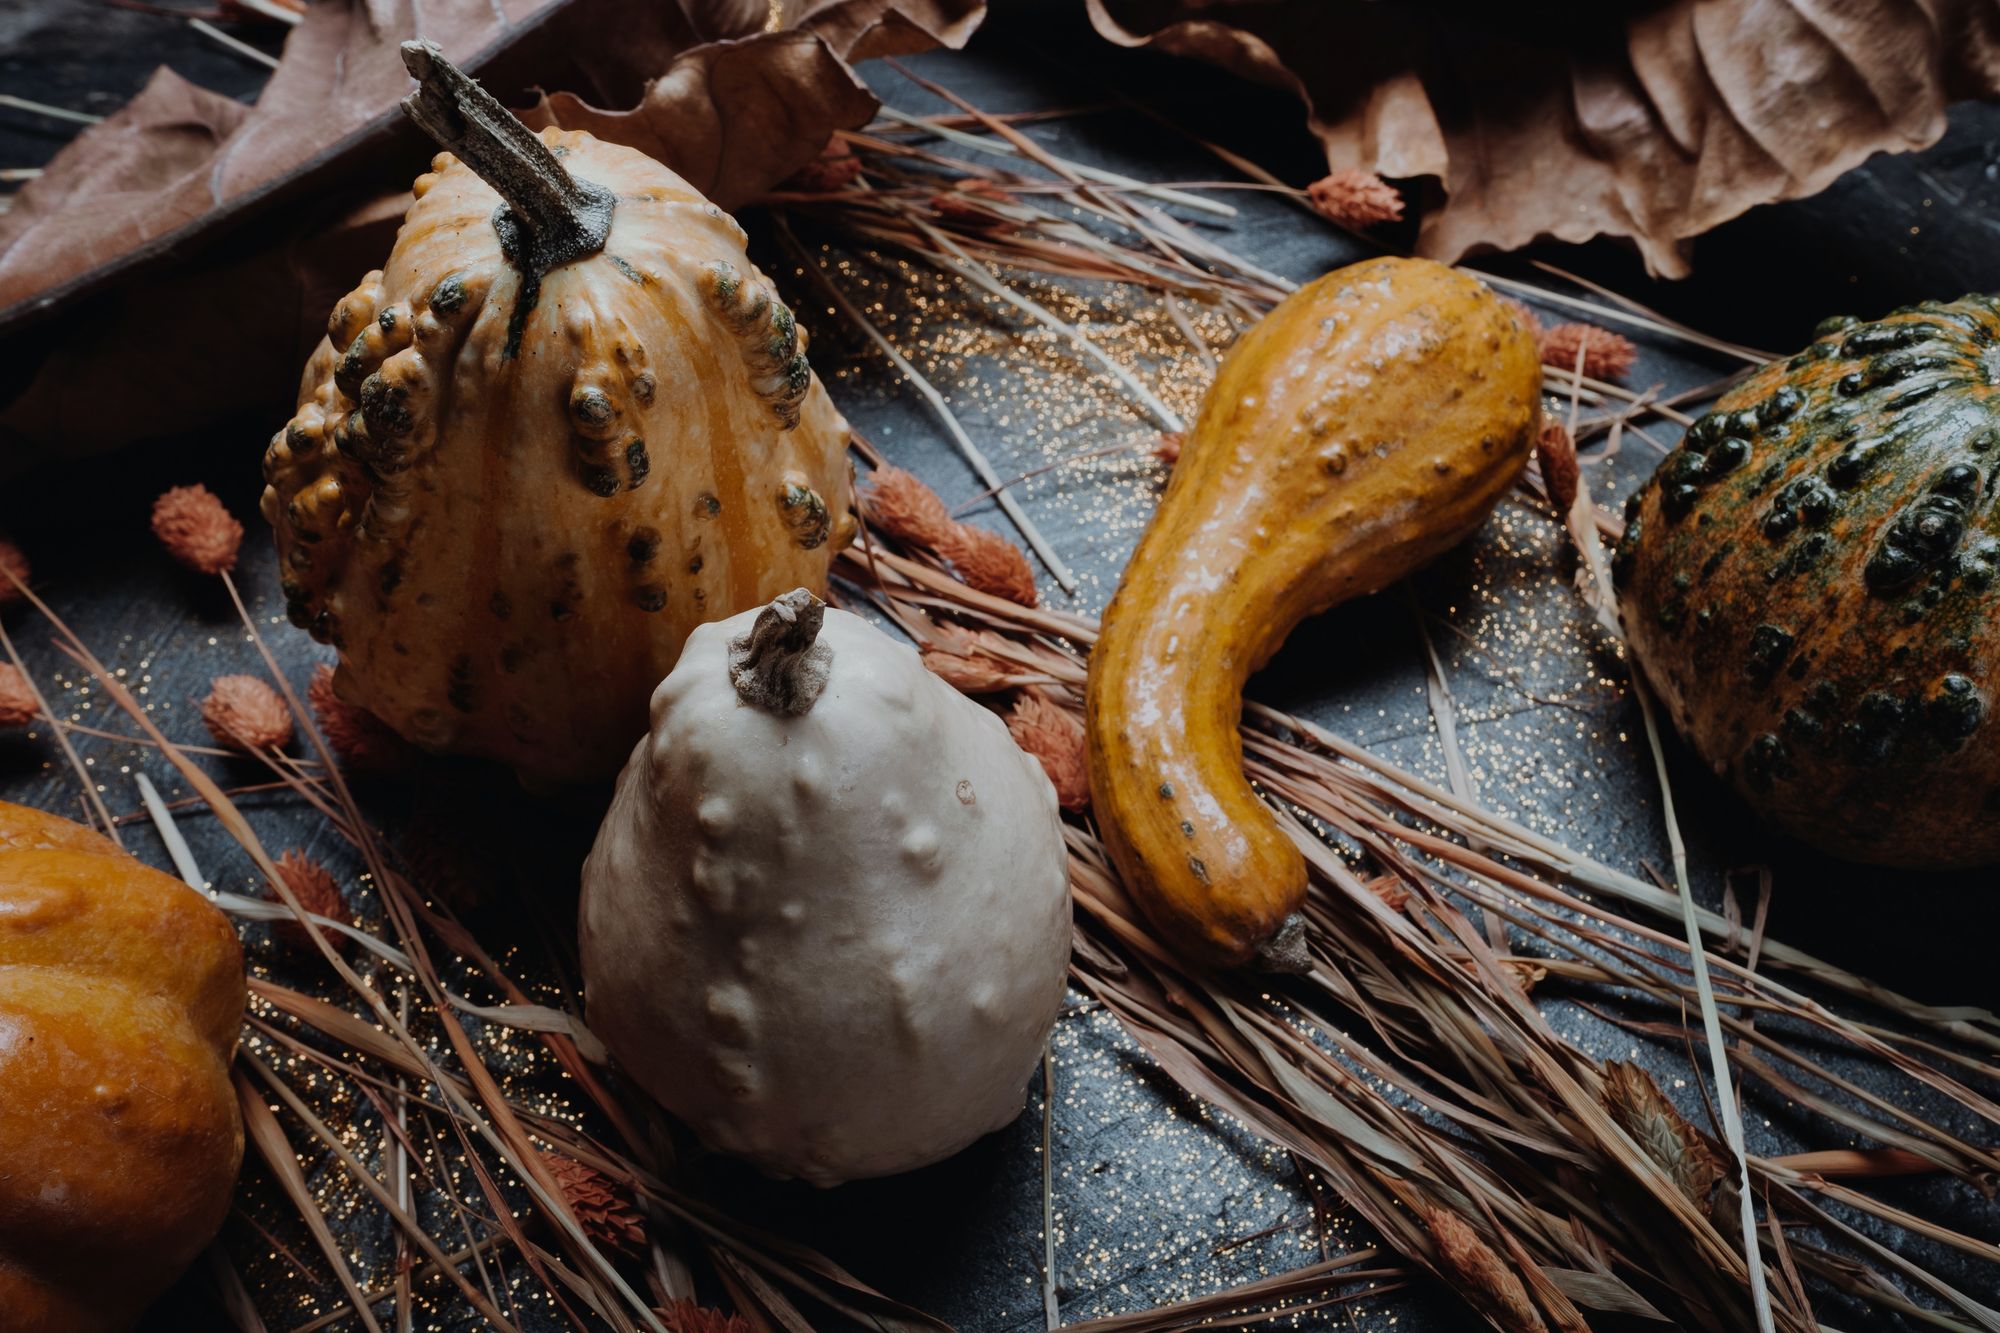 What’s On Your Autumn Plate? And Is It Sustainable?